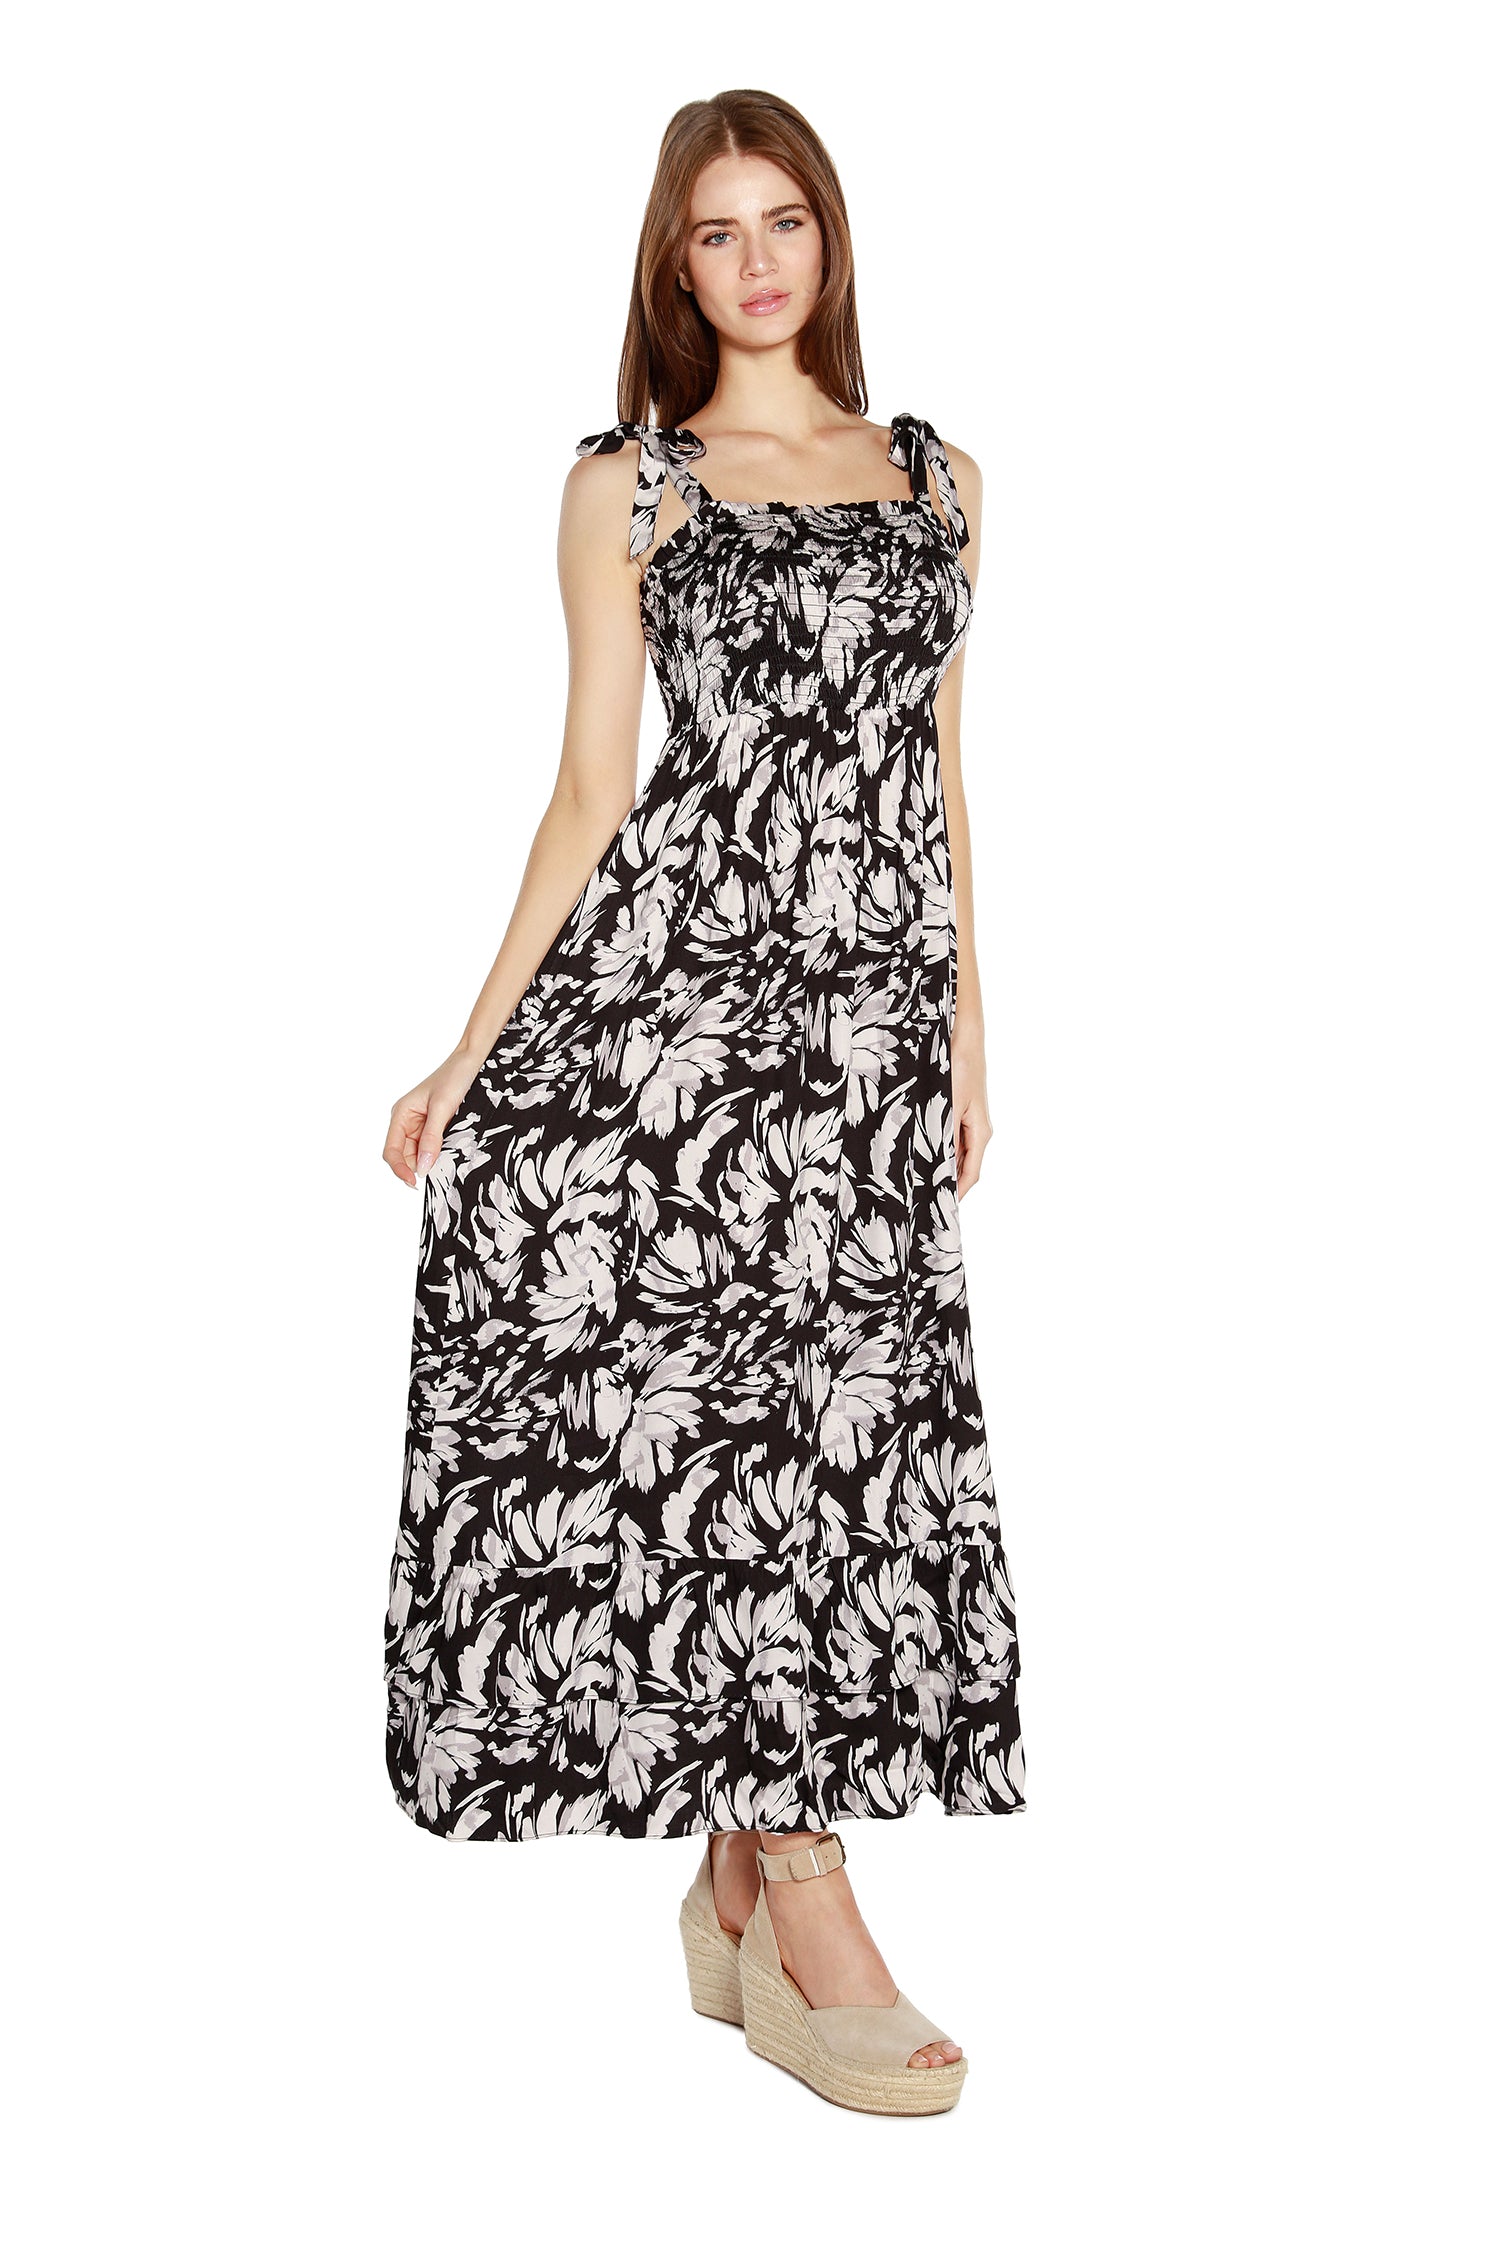 Women’s Floral Maxi Dress with Tie Straps and Hem Ruffles